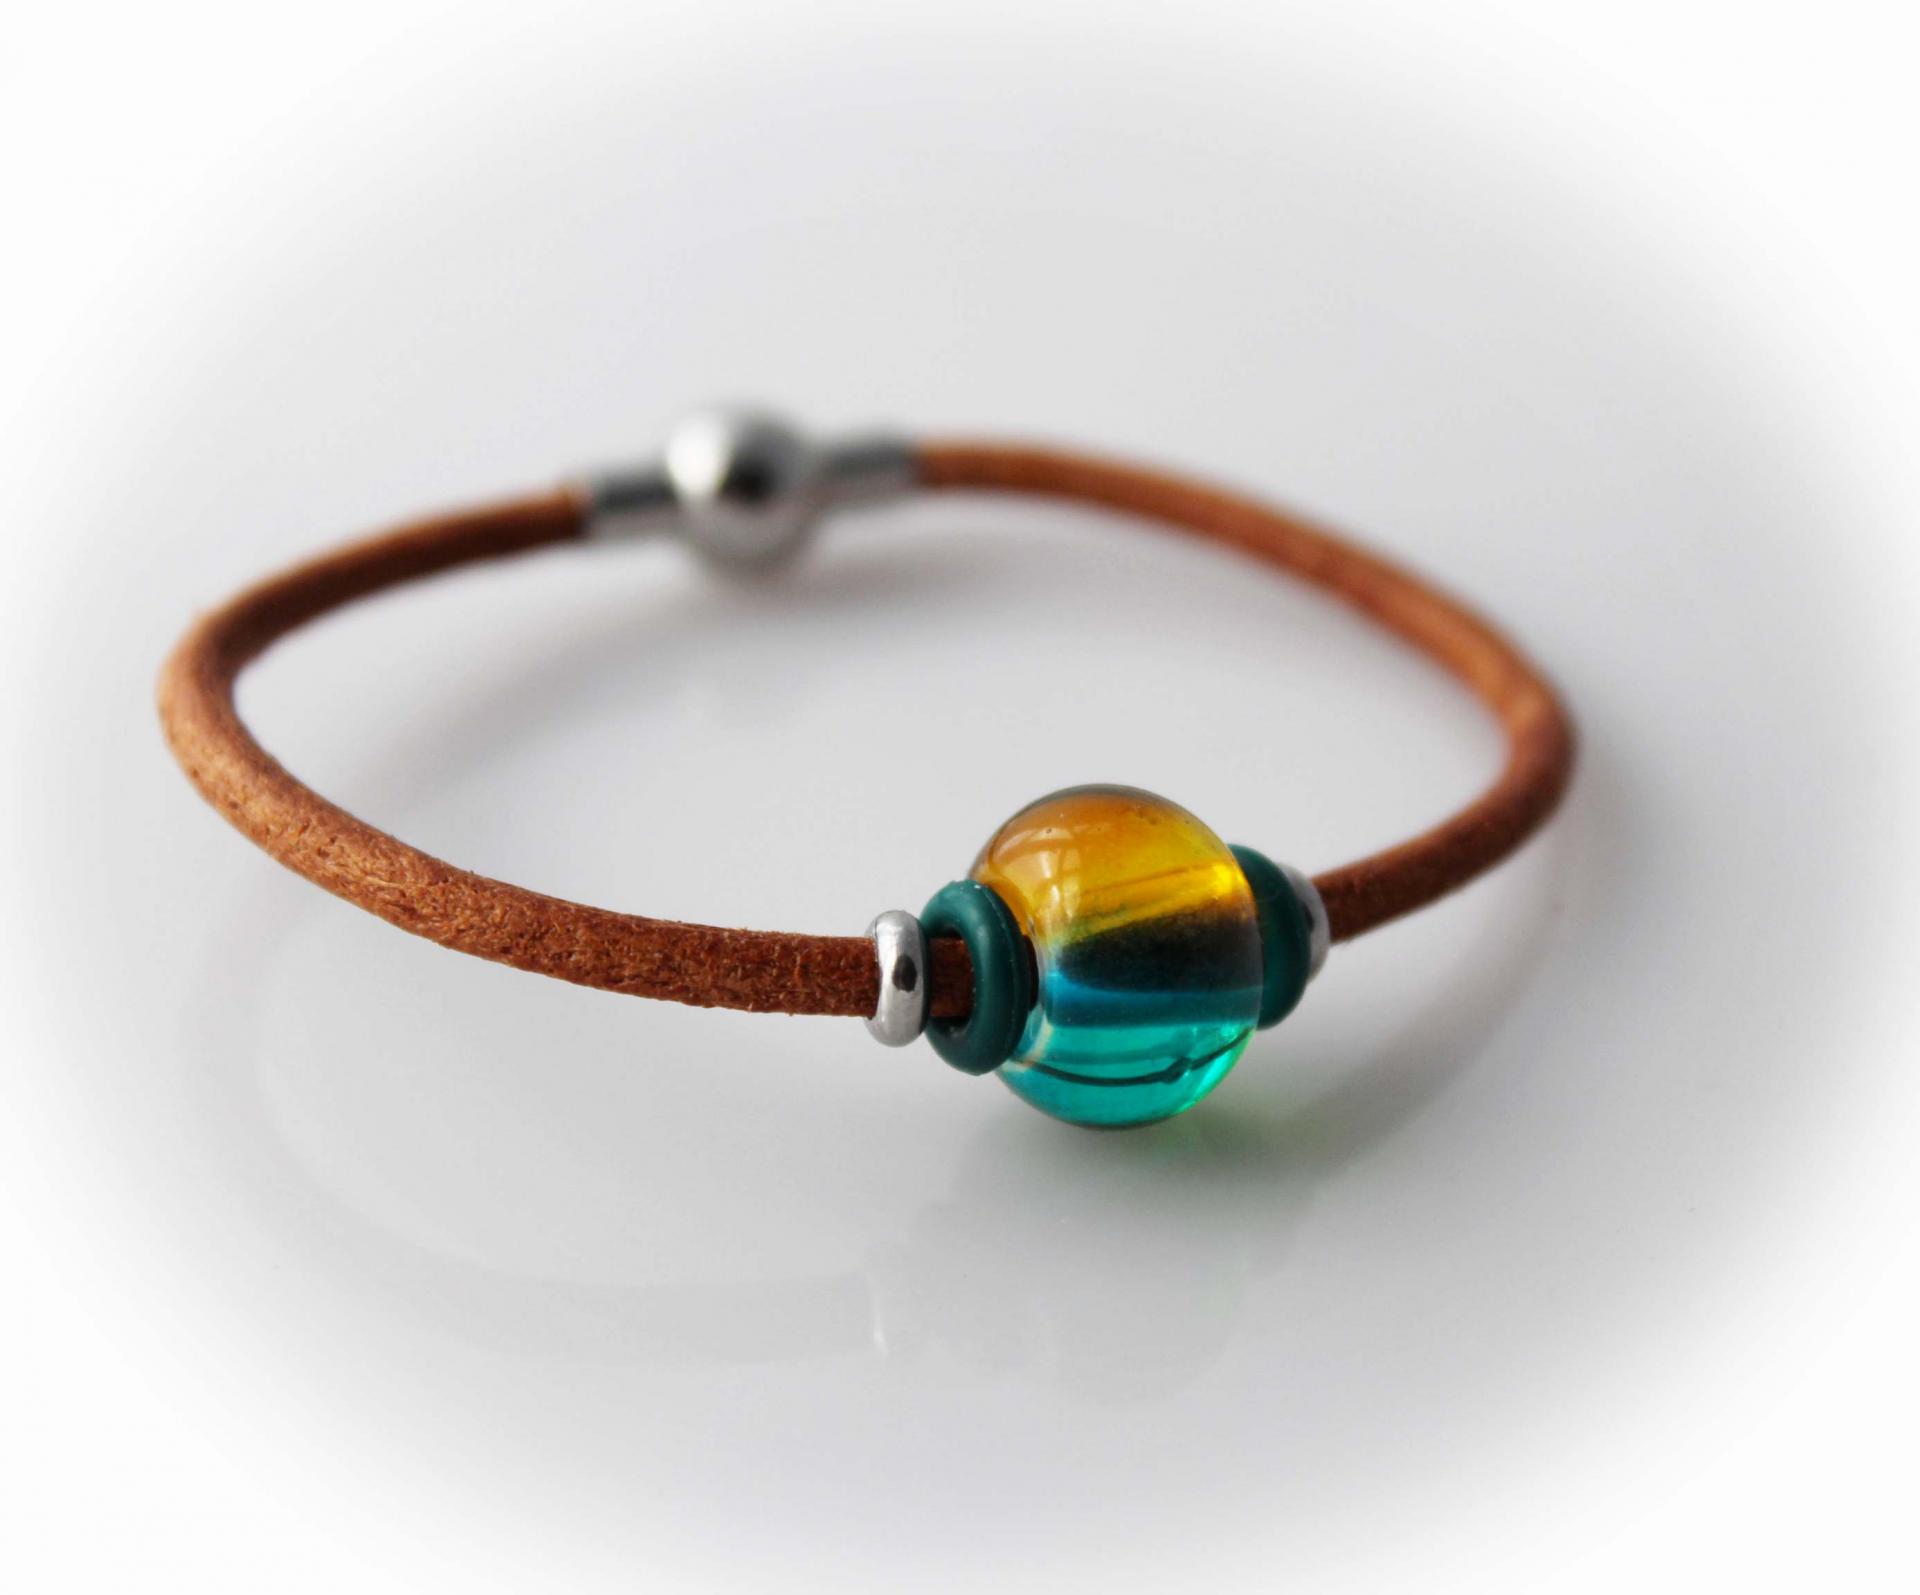 Rustic Brown leather Bracelet with Bright Captive Bead - Customise your Length